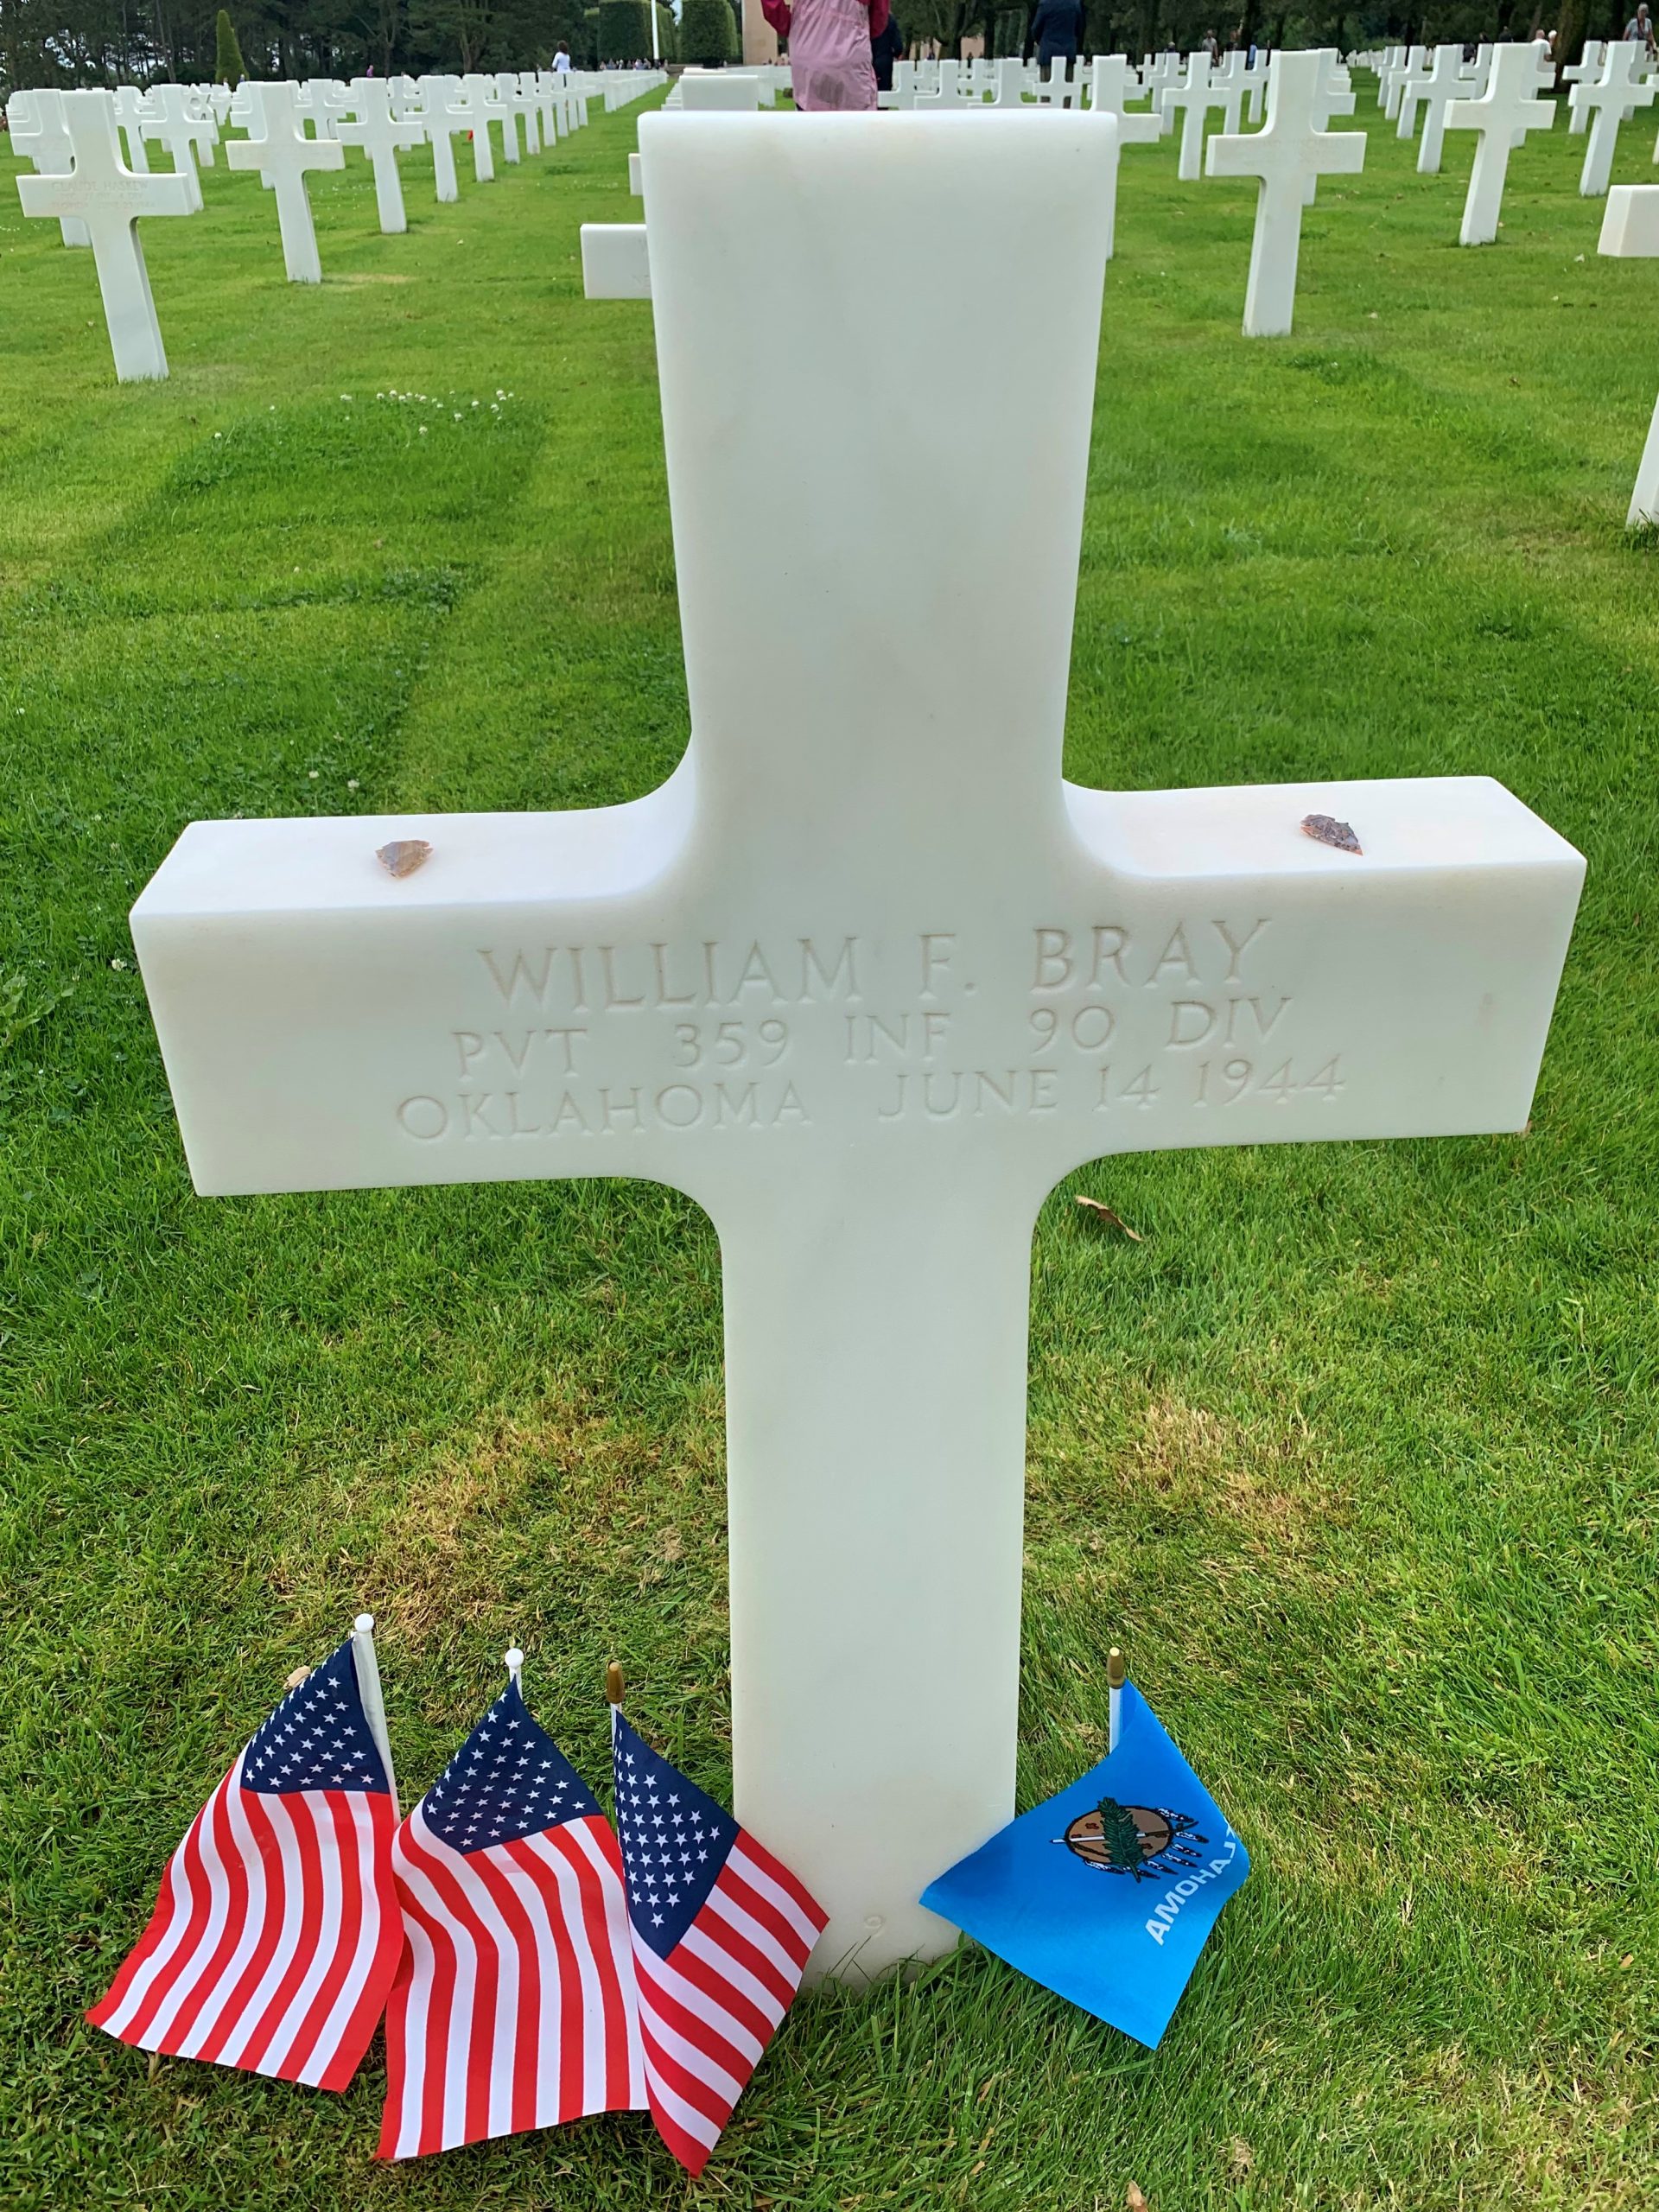 Rep. Luttrell Visits Normandy, France